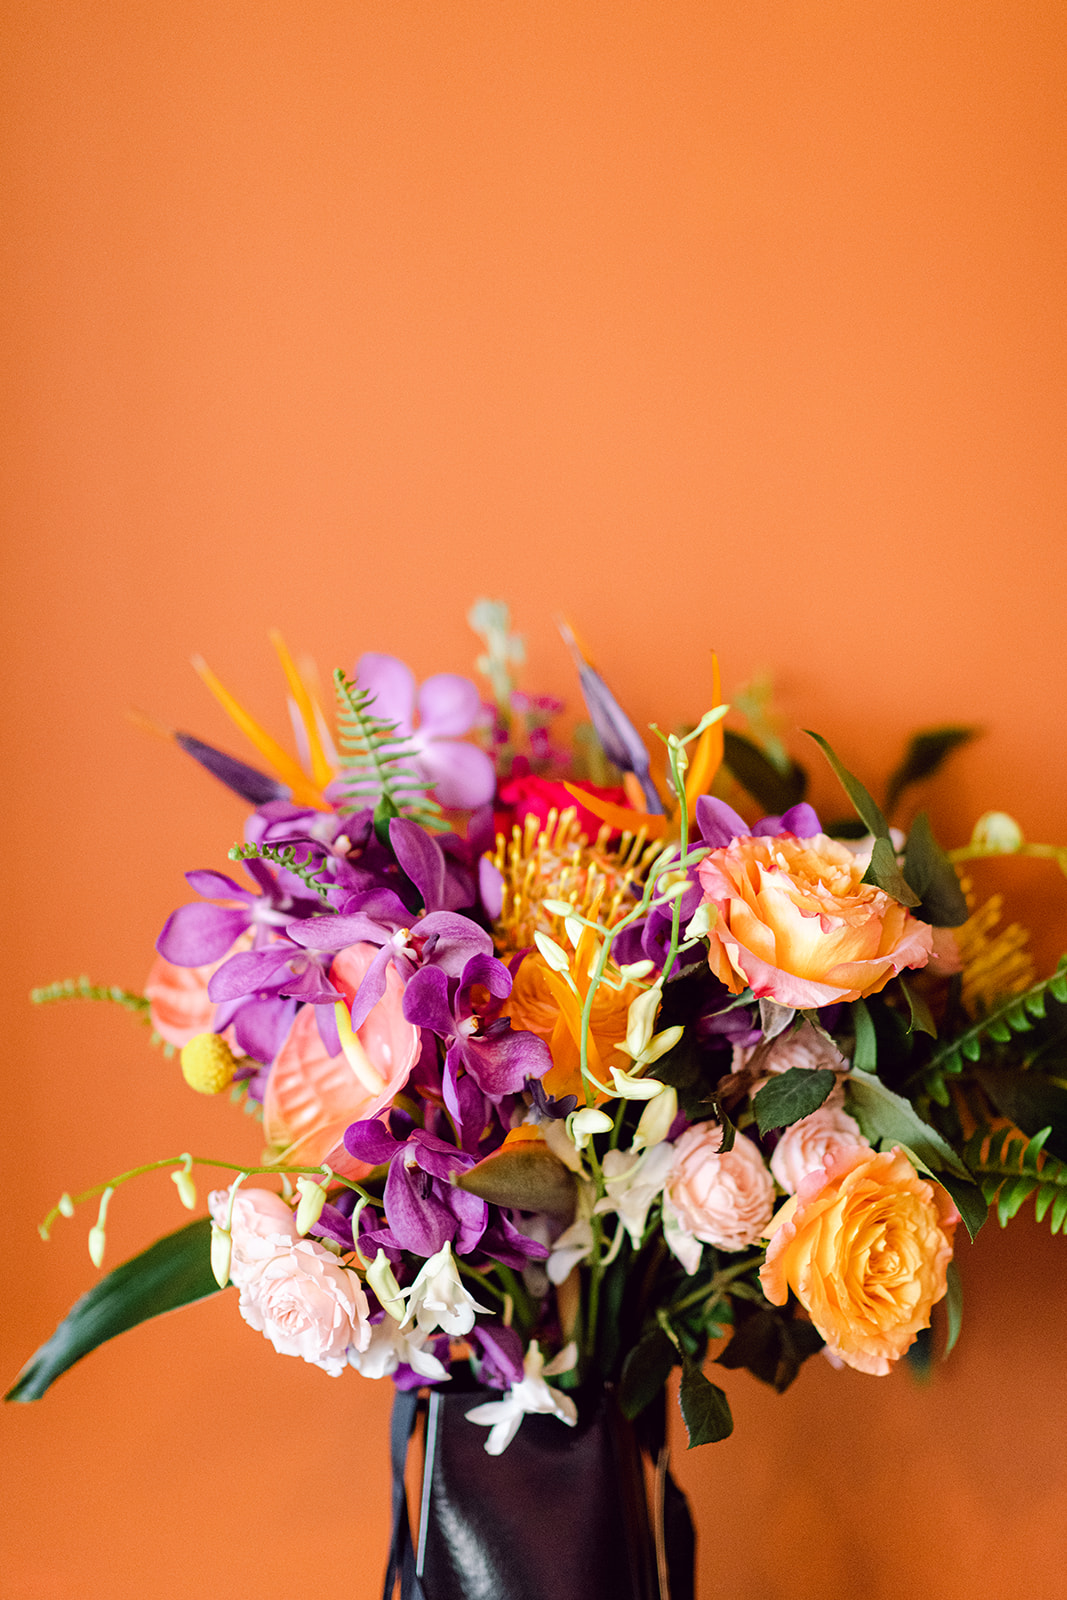 Brides colorful bouquet set against warm orange wall at Mayfair House Hotel & Garden in Miami on wedding day.